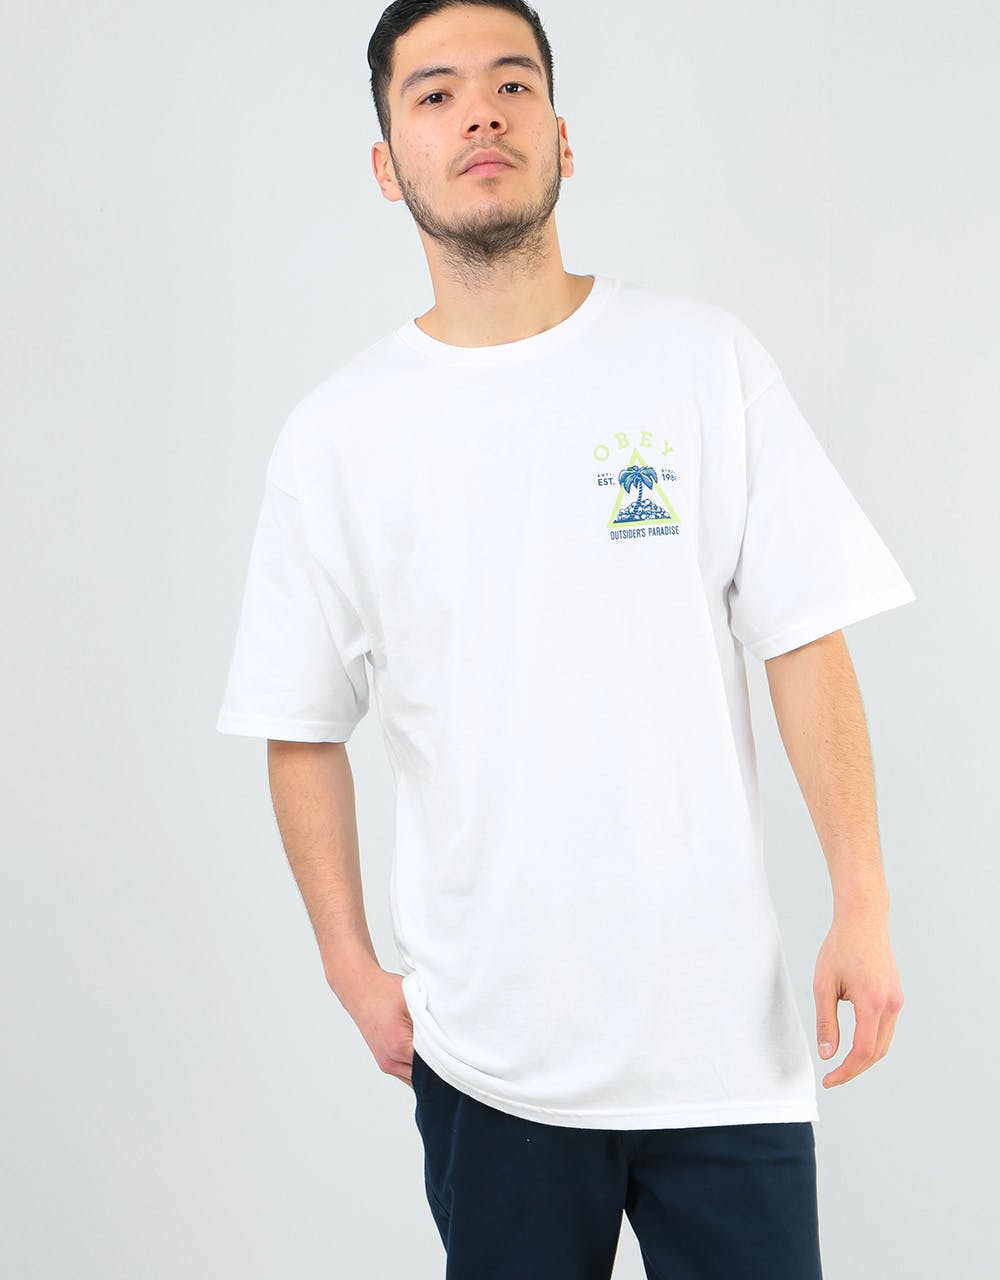 Obey Outsider's Paradise T-Shirt - White